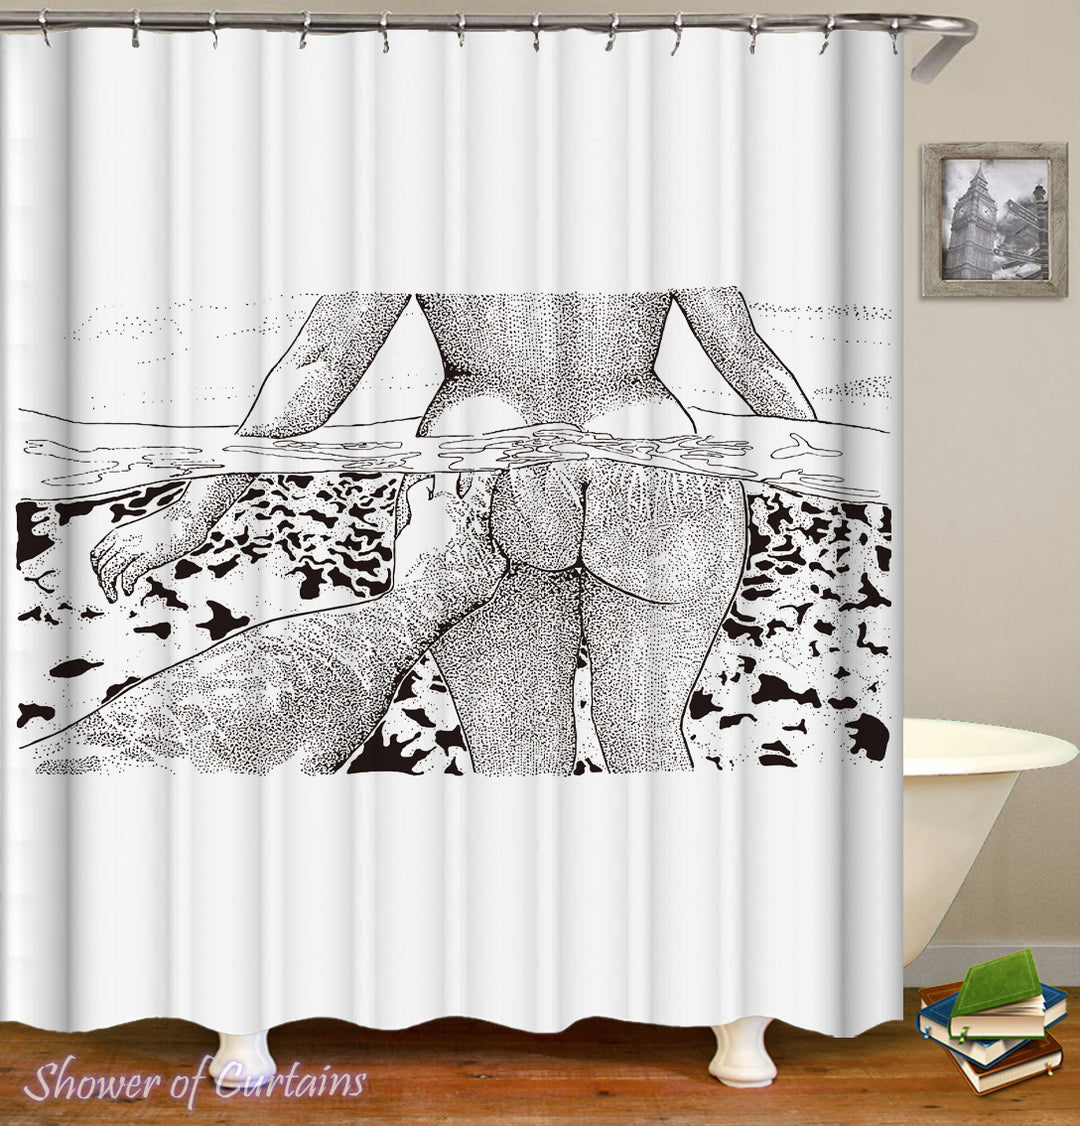 Grab That Booty - Cool shower curtains themes